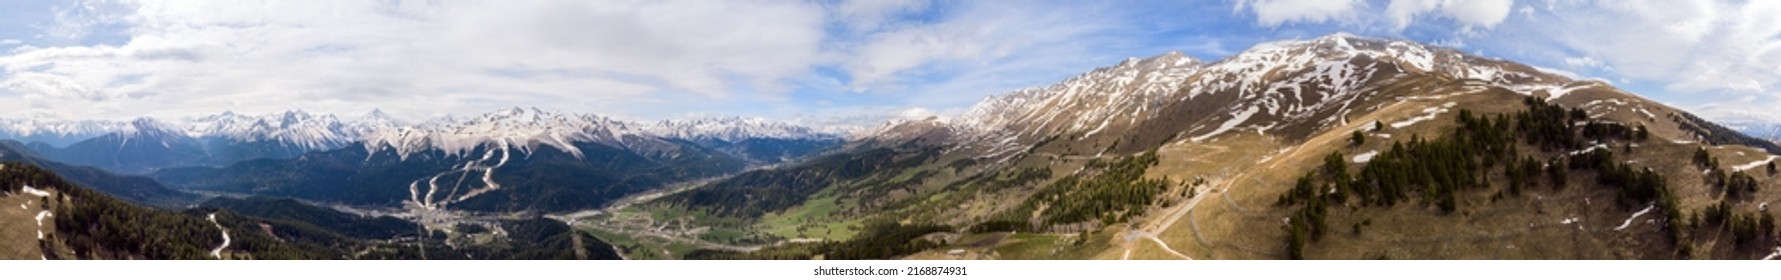 Panoramic landscape view, snow covered mountain peaks on mountain range. Hills and mountains covered with green pine forest. Arkhyz ski resort, Caucasus mountains, Russia